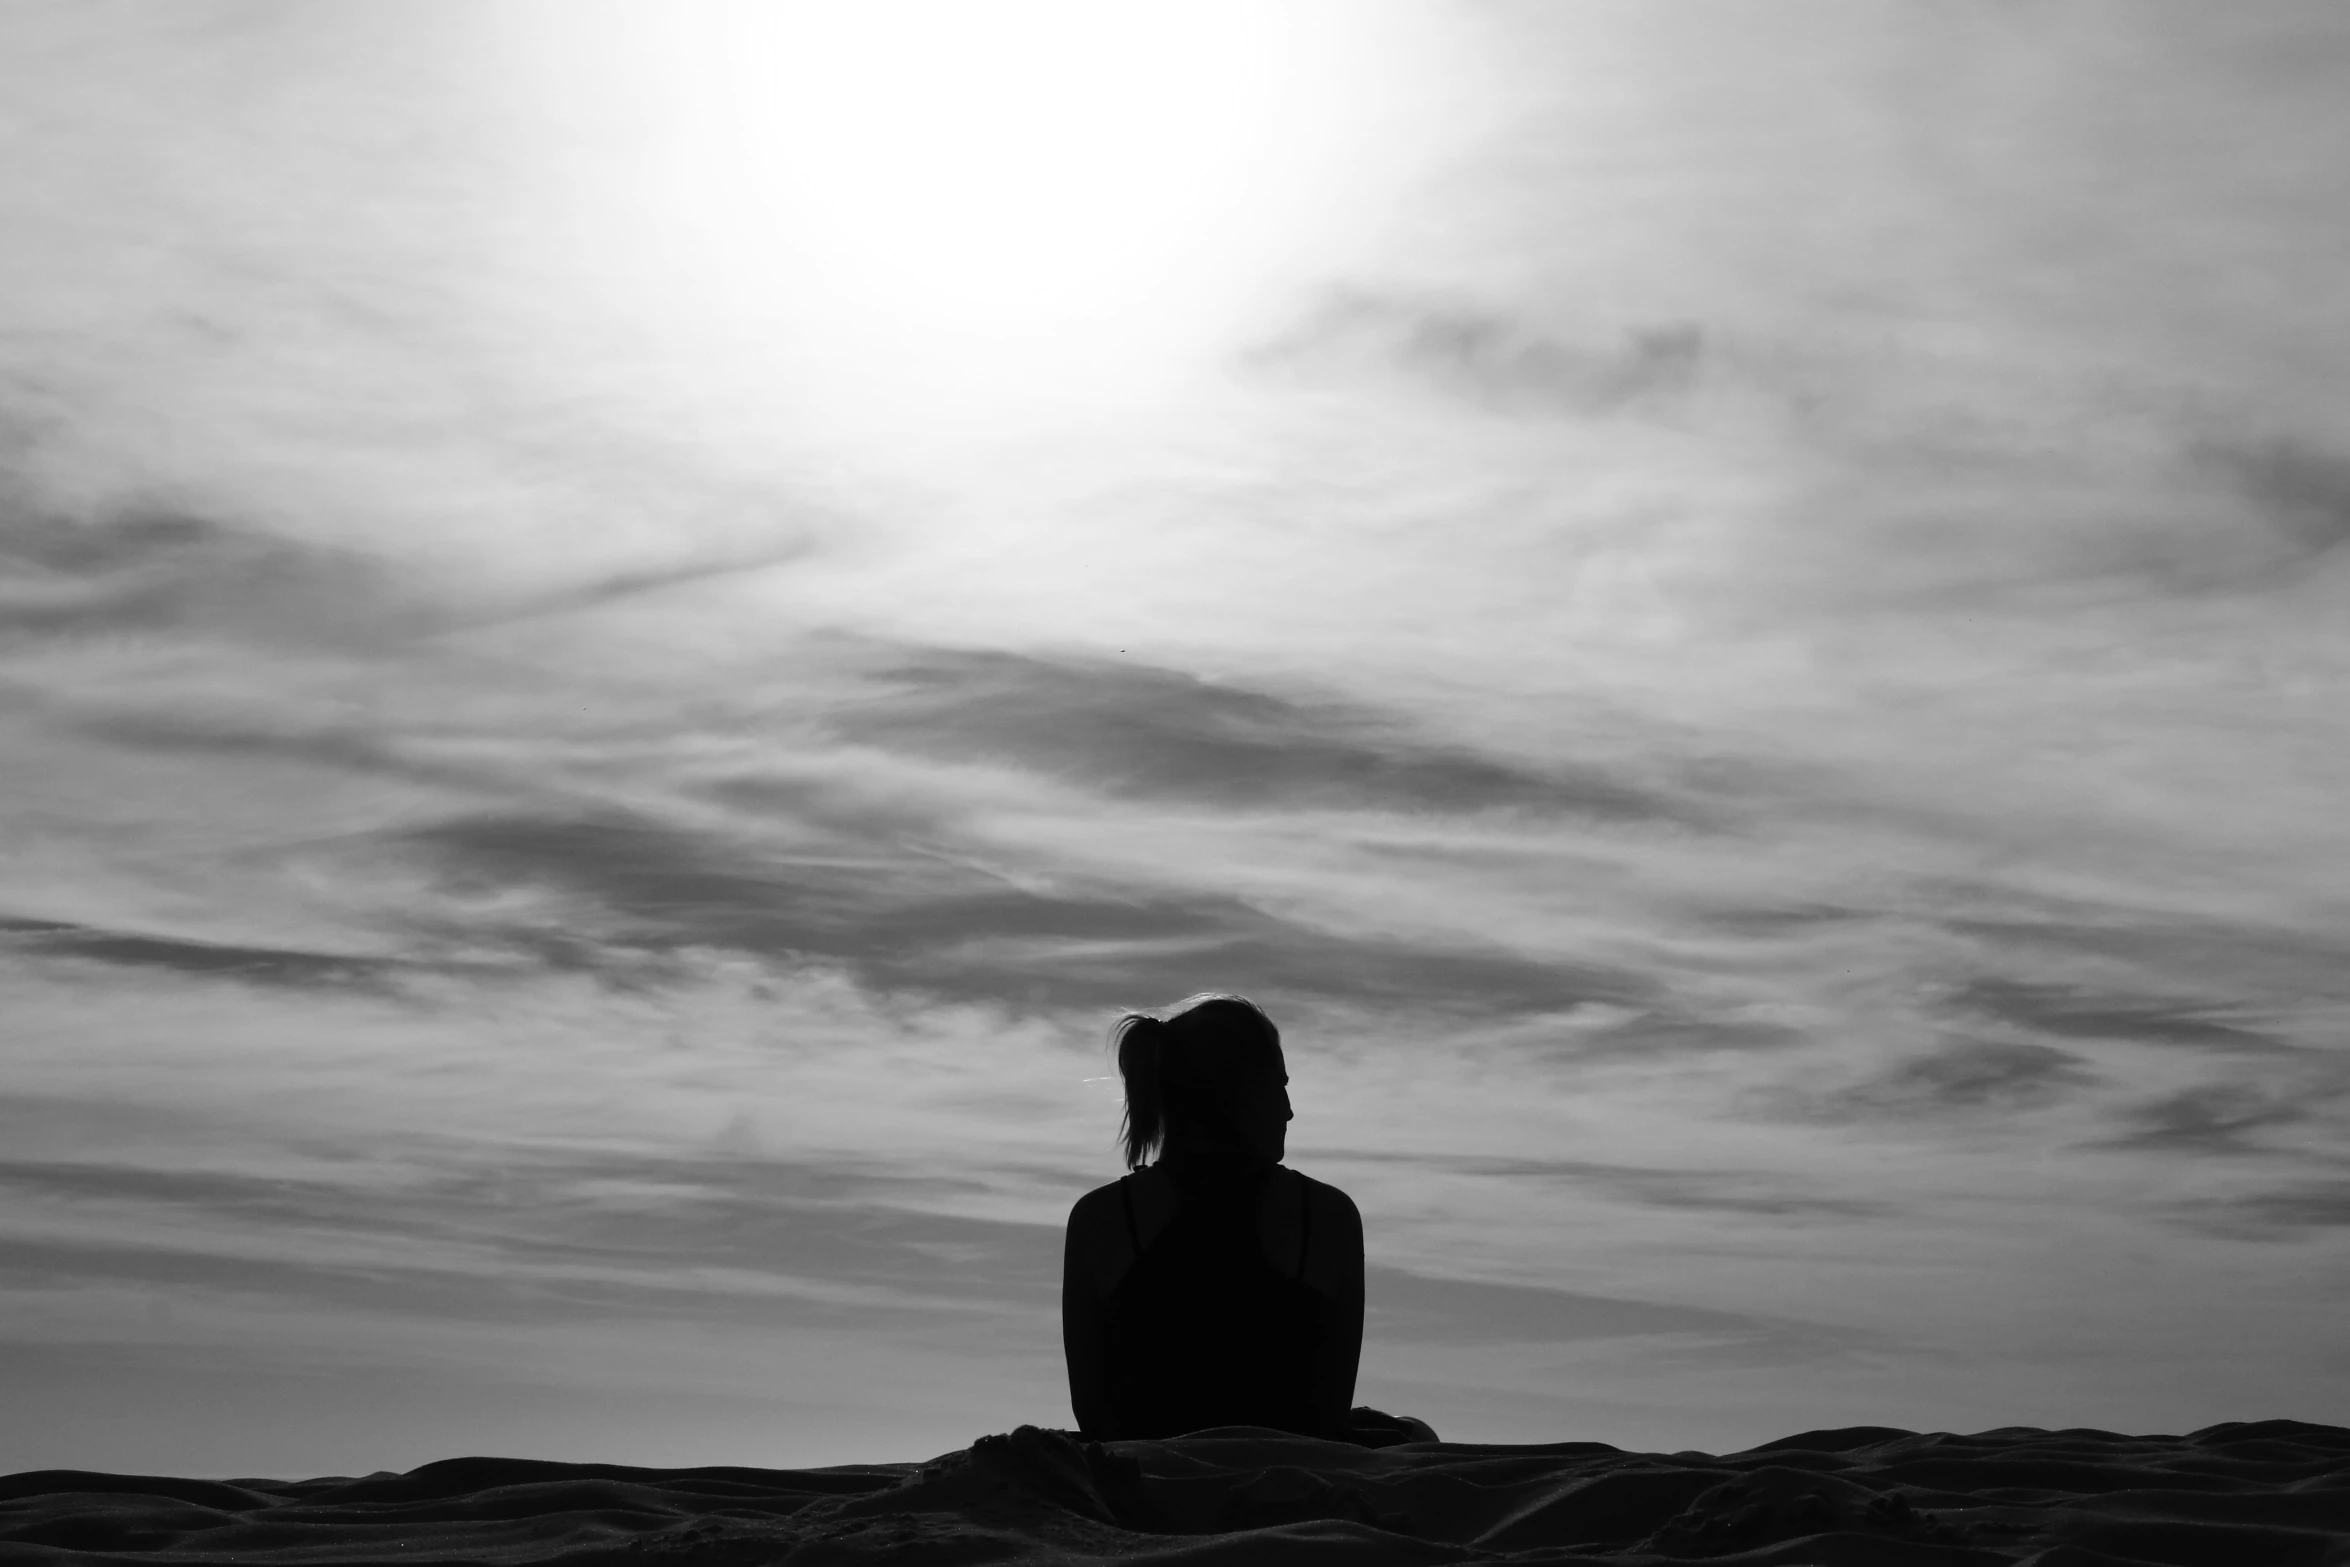 the silhouette of a person seated on the sand